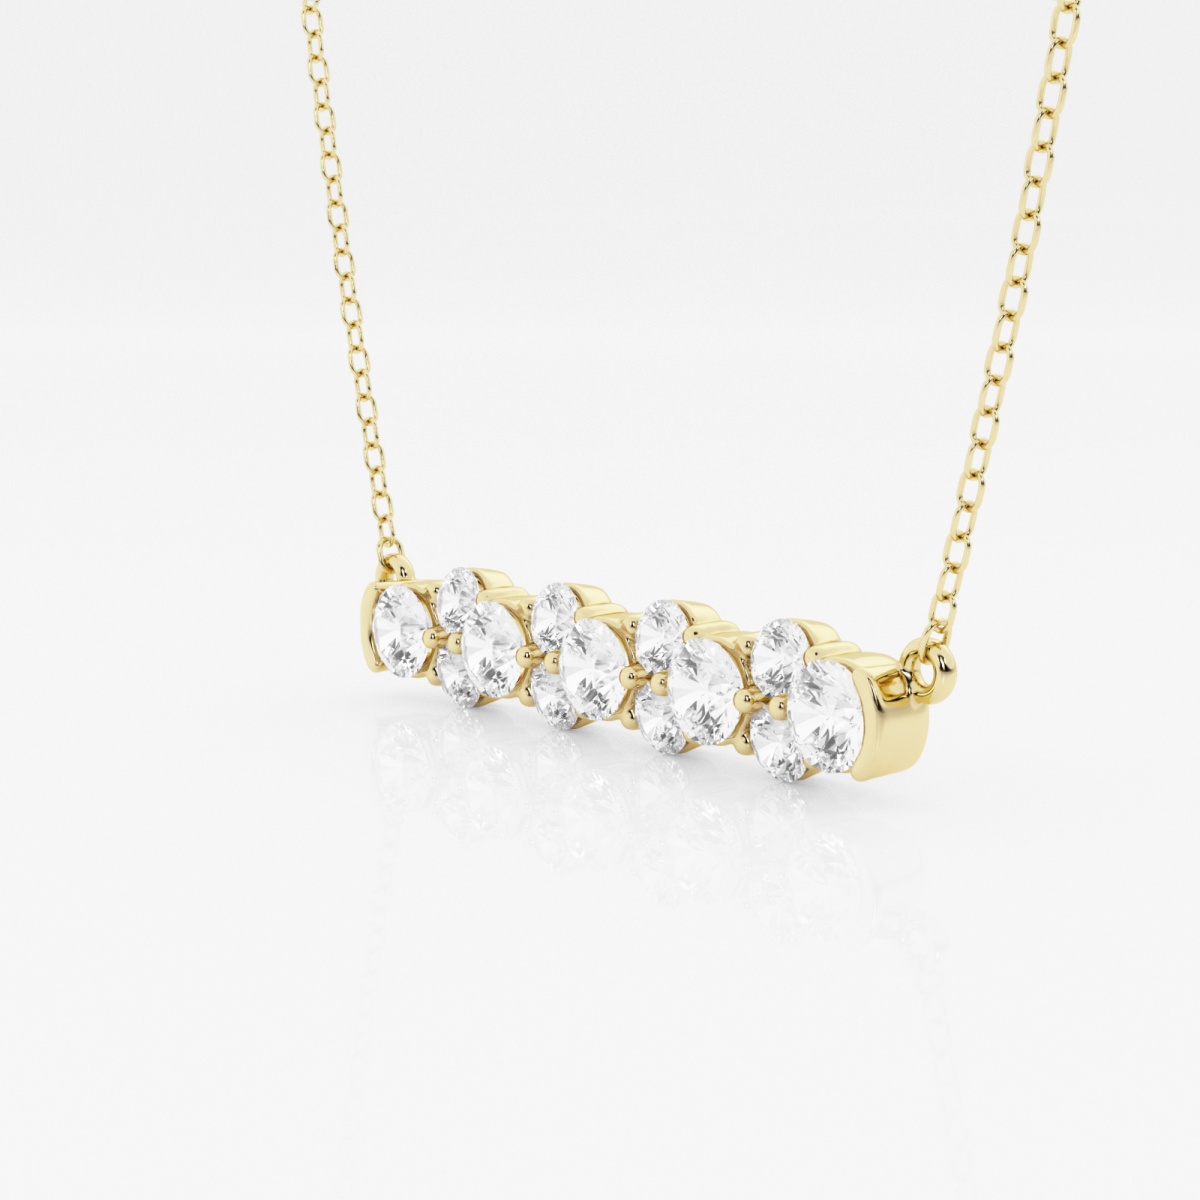 Additional Image 1 for  1 1/2 ctw Round Lab Grown Diamond Garland Fashion Pendant with Adjustable Chain